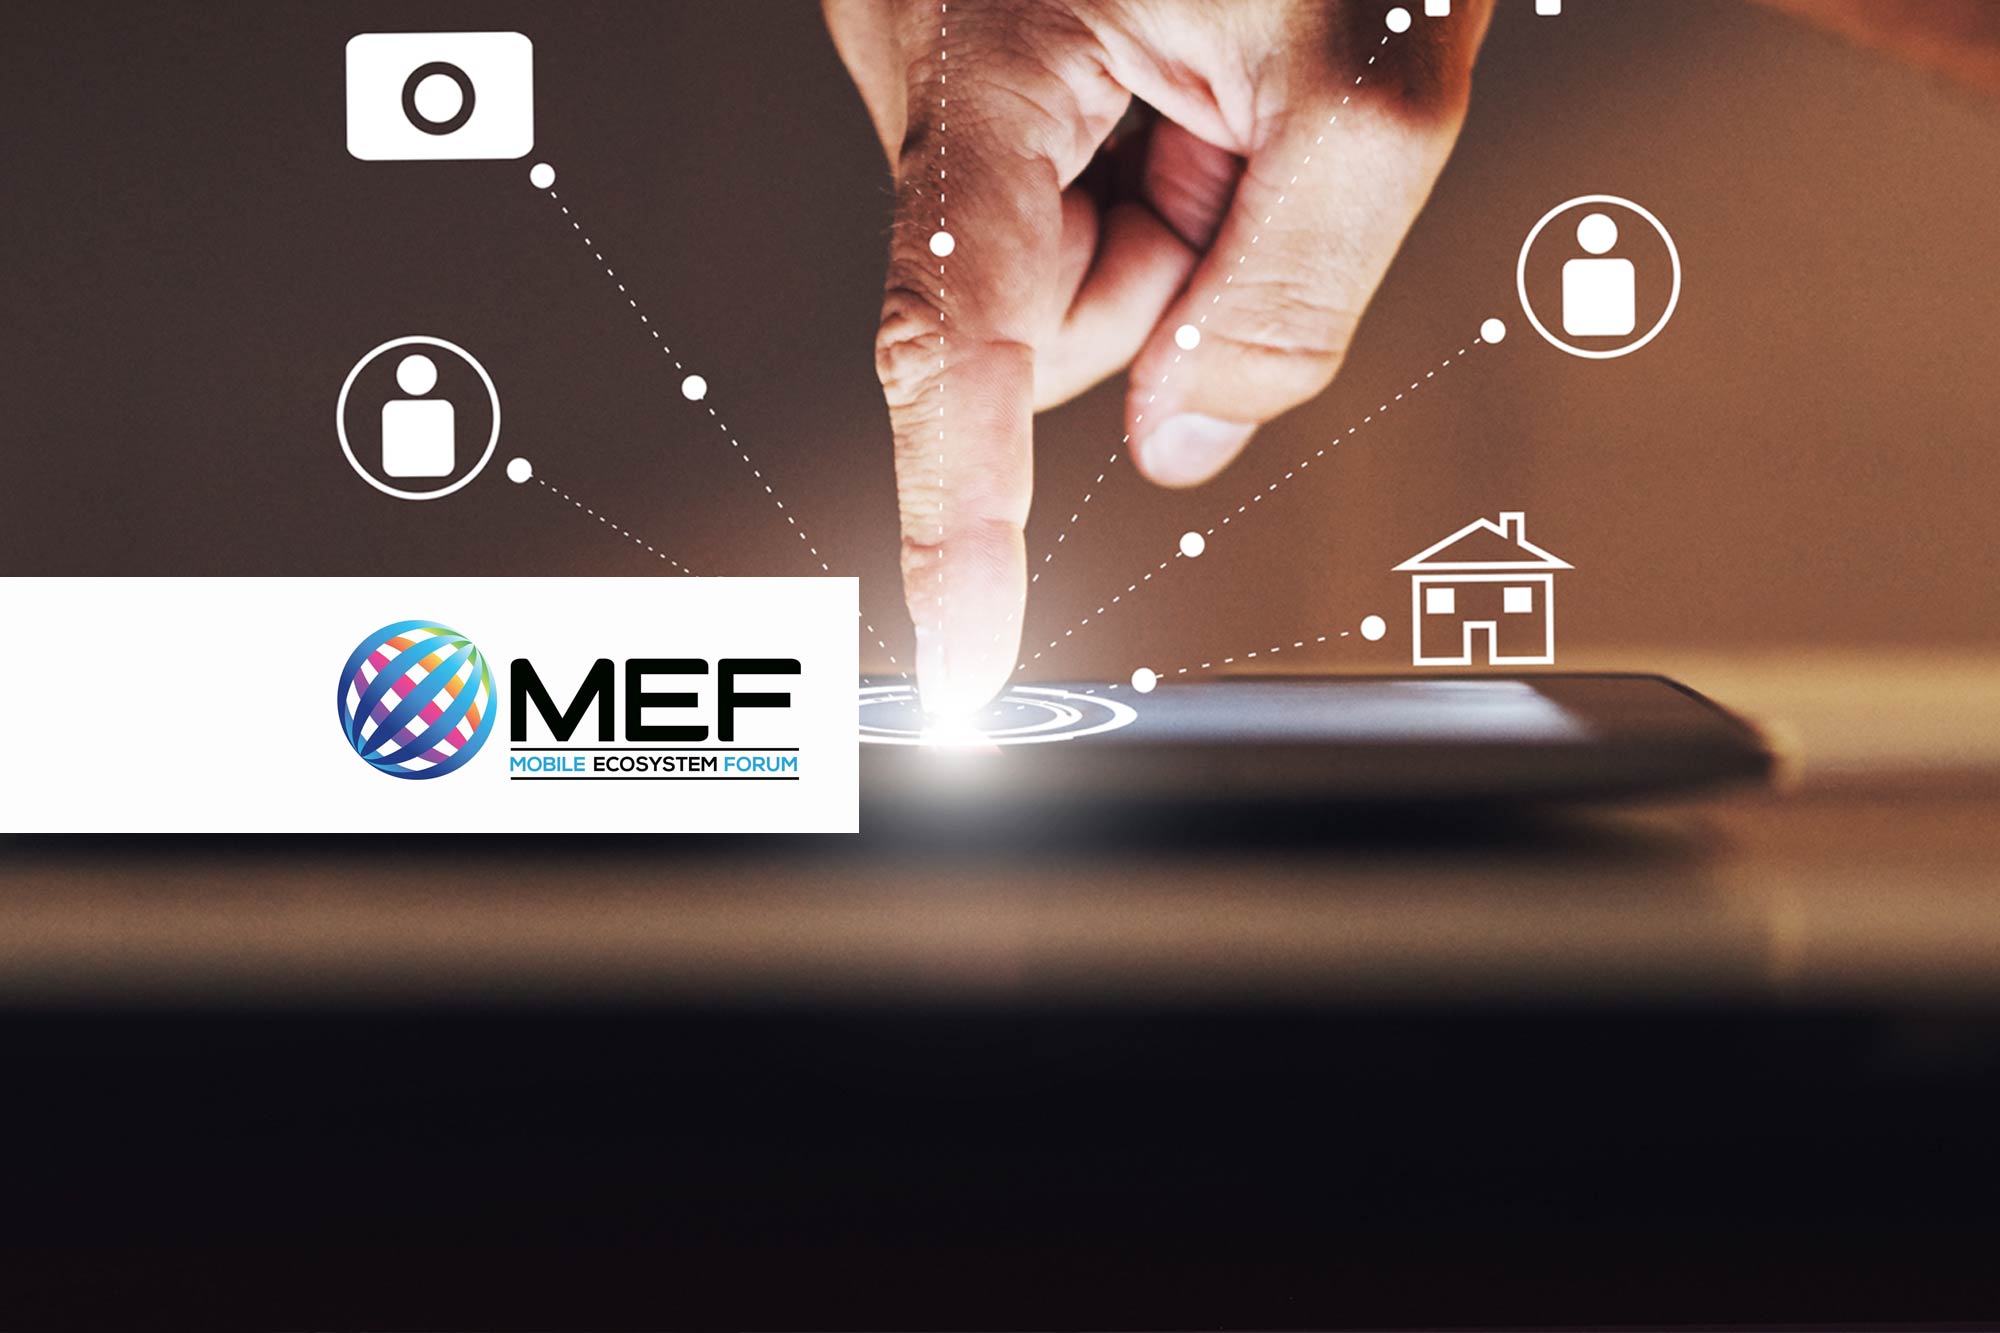 MobiWeb Join Mobile Ecosystem Forum - MEF